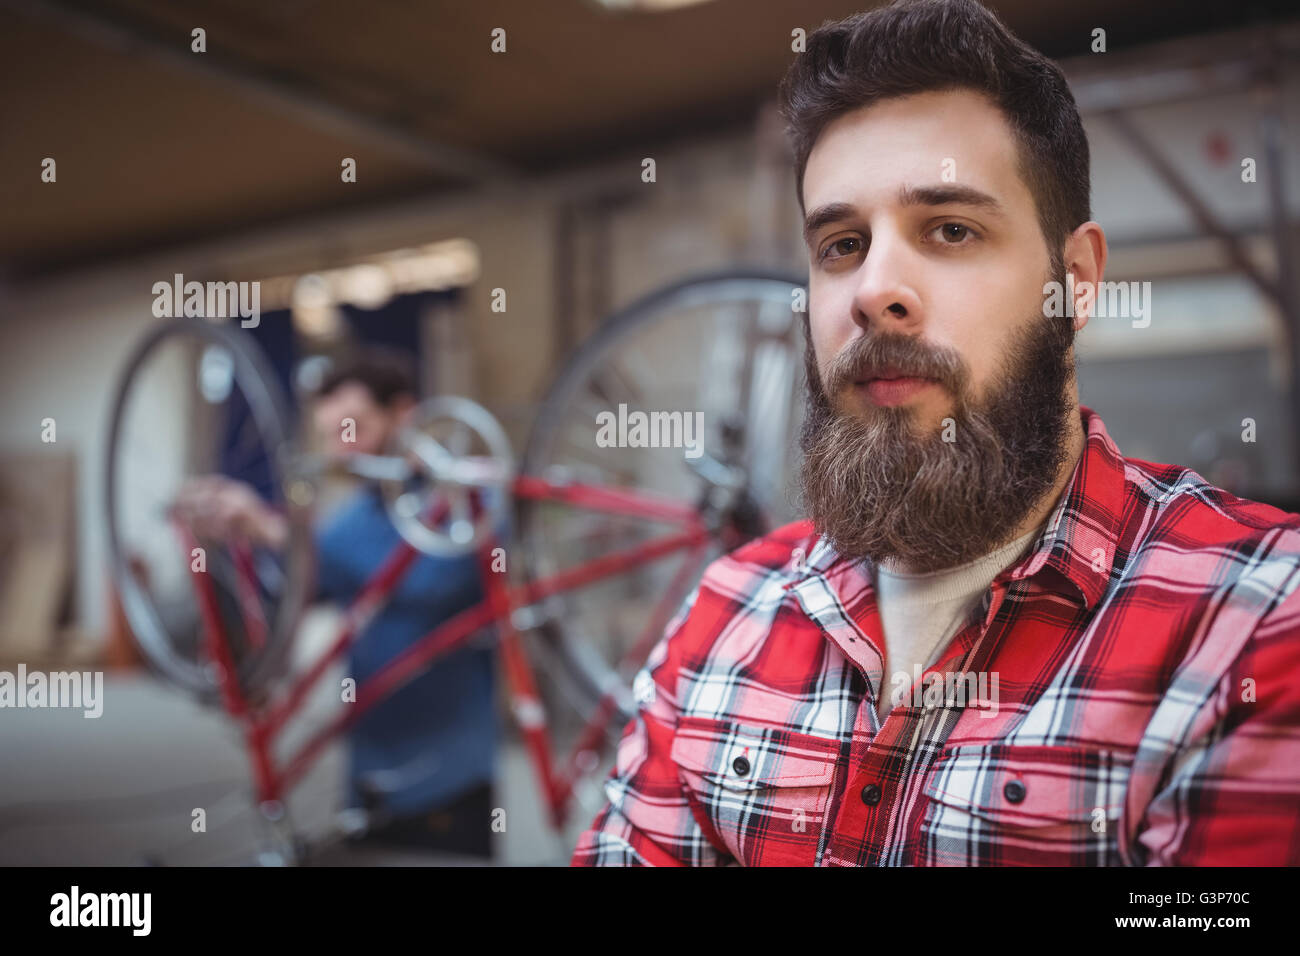 Portrait of mechanic looking at camera Stock Photo